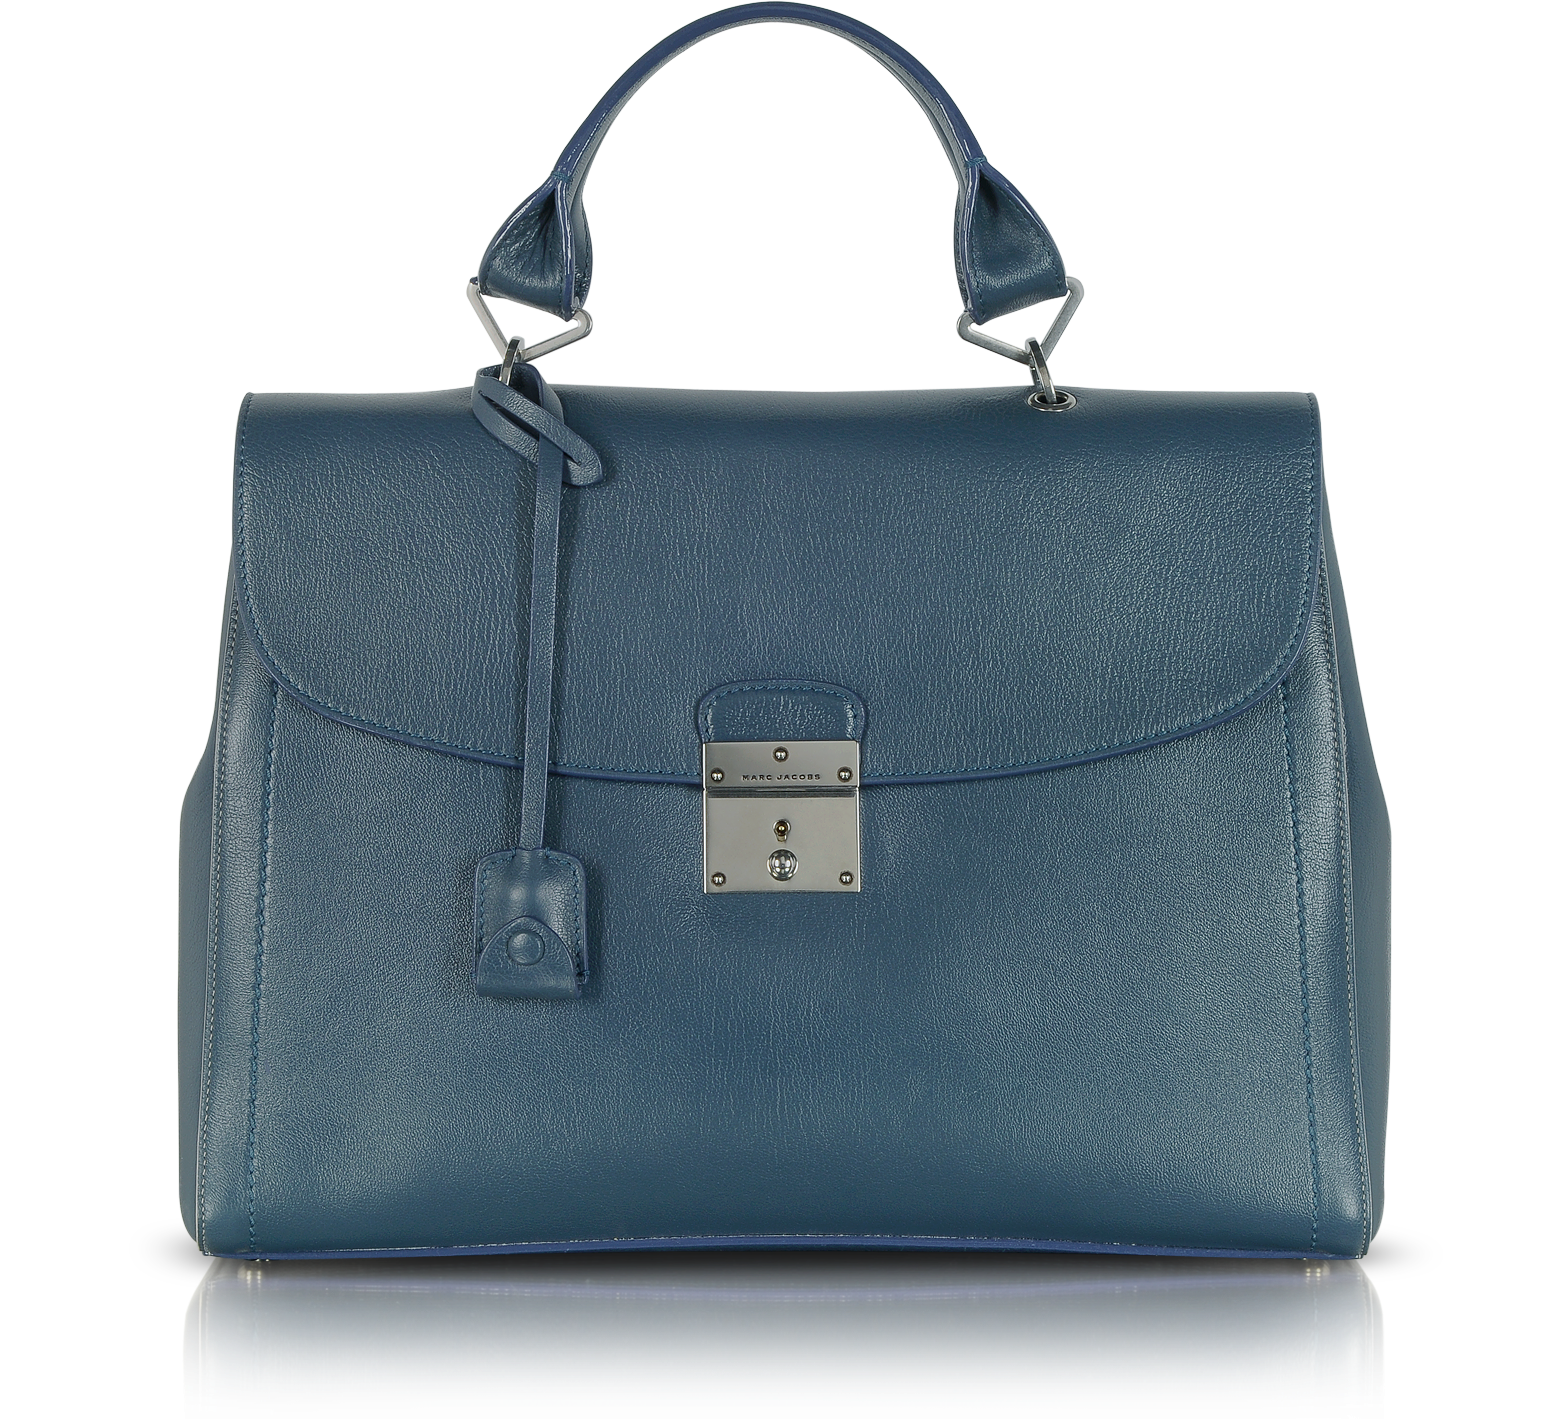 Marc Jacobs The 1984 Nautical Blue Satchel Bag at FORZIERI